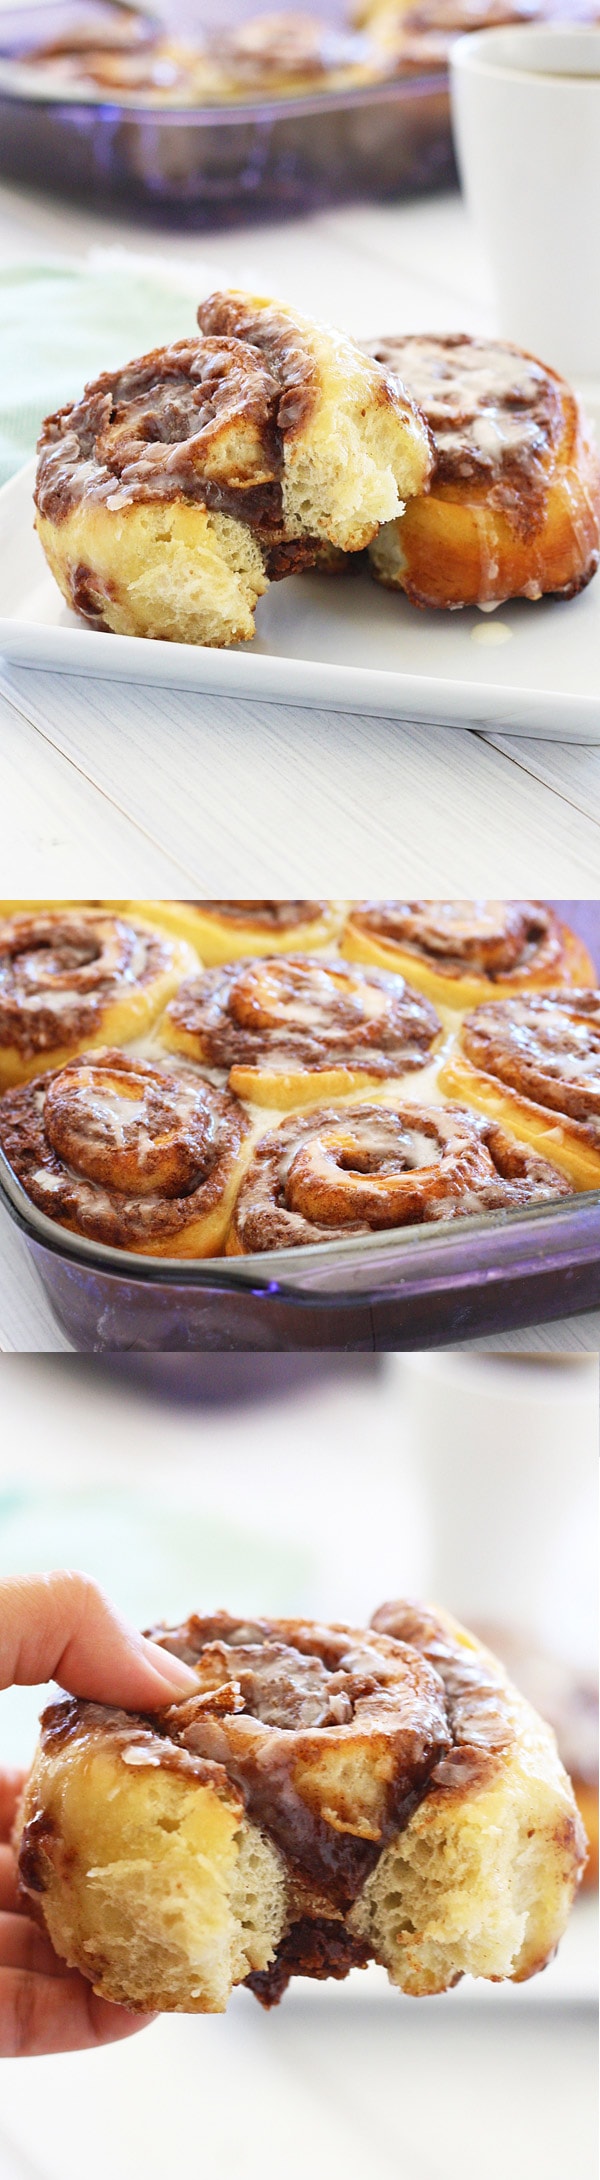 Pizza Dough Cinnamon Rolls - The easiest cinnamon rolls recipe EVER made with store-bought pizza dough. Quick and no-fuss recipe for busy moms! | rasamalaysia.com